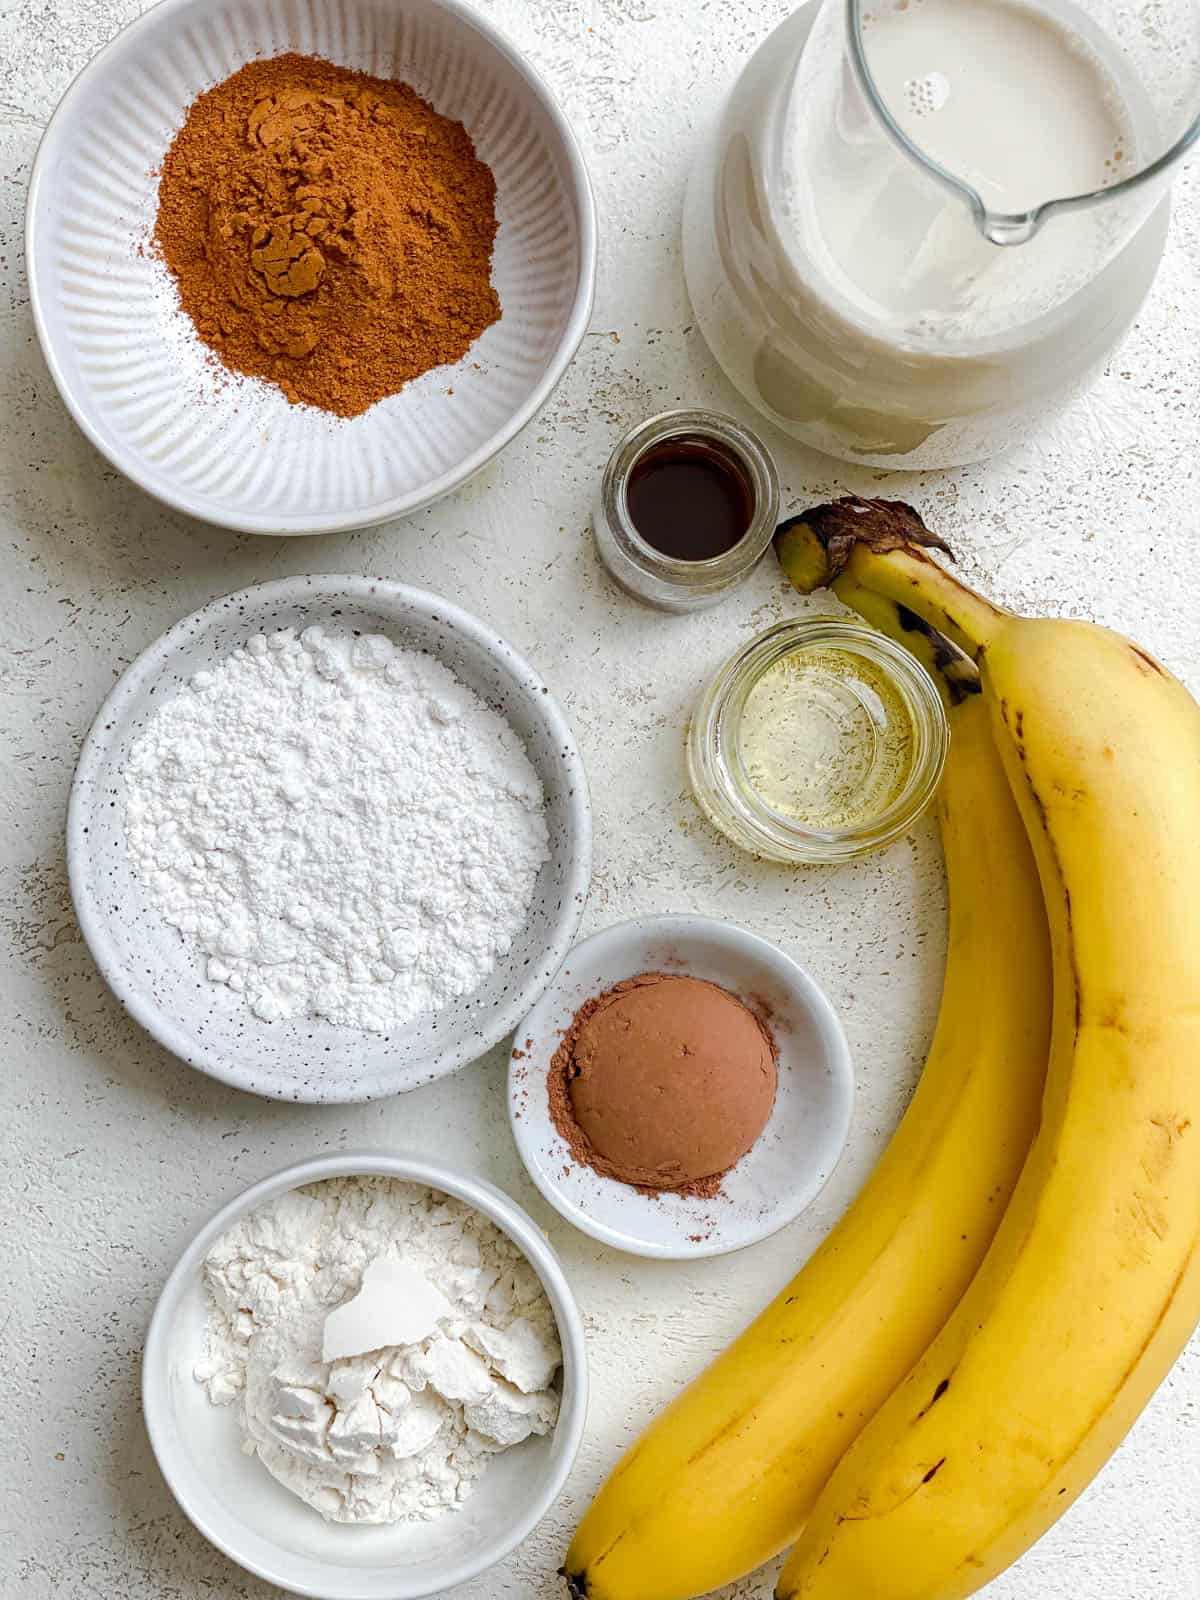 ingredients for Rabanada (Brazilian French Toast) measured out against a white surface